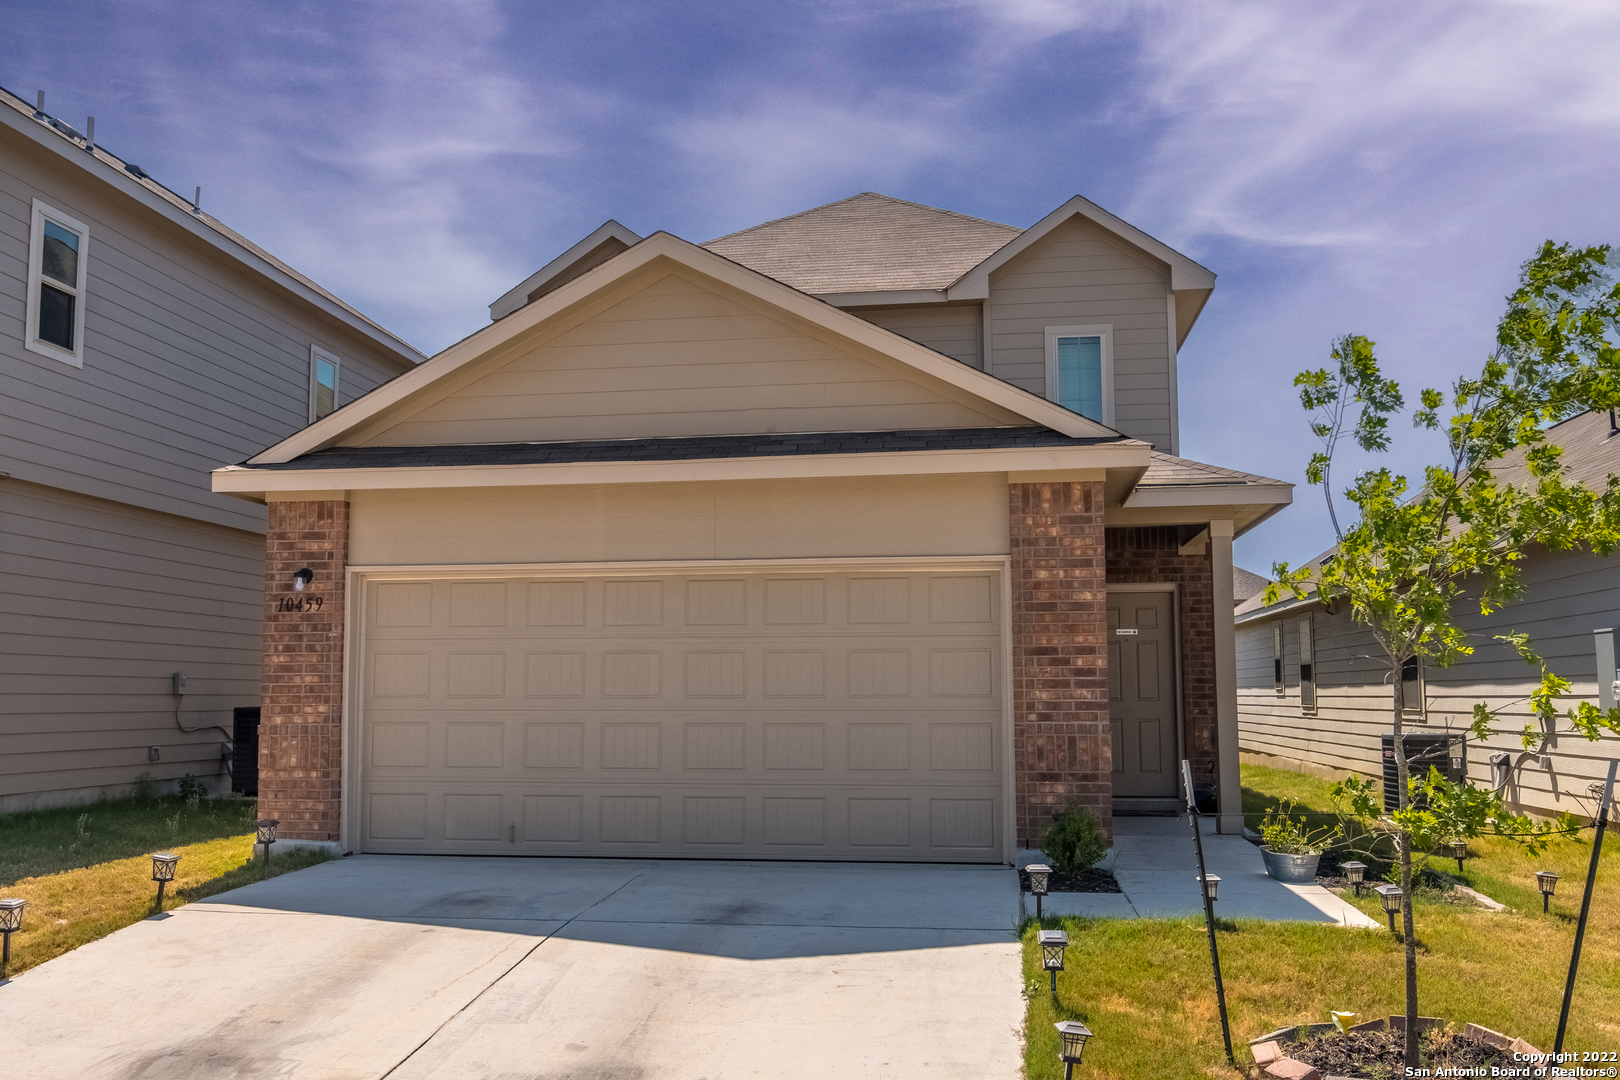 Beautiful move in Ready 1 year old home. Model floor plan with covered patio and loft area. No need to wait on construction move the family in now. Minutes from Brooks City Base food and shopping, just a quick drive to downtown San Antonio.